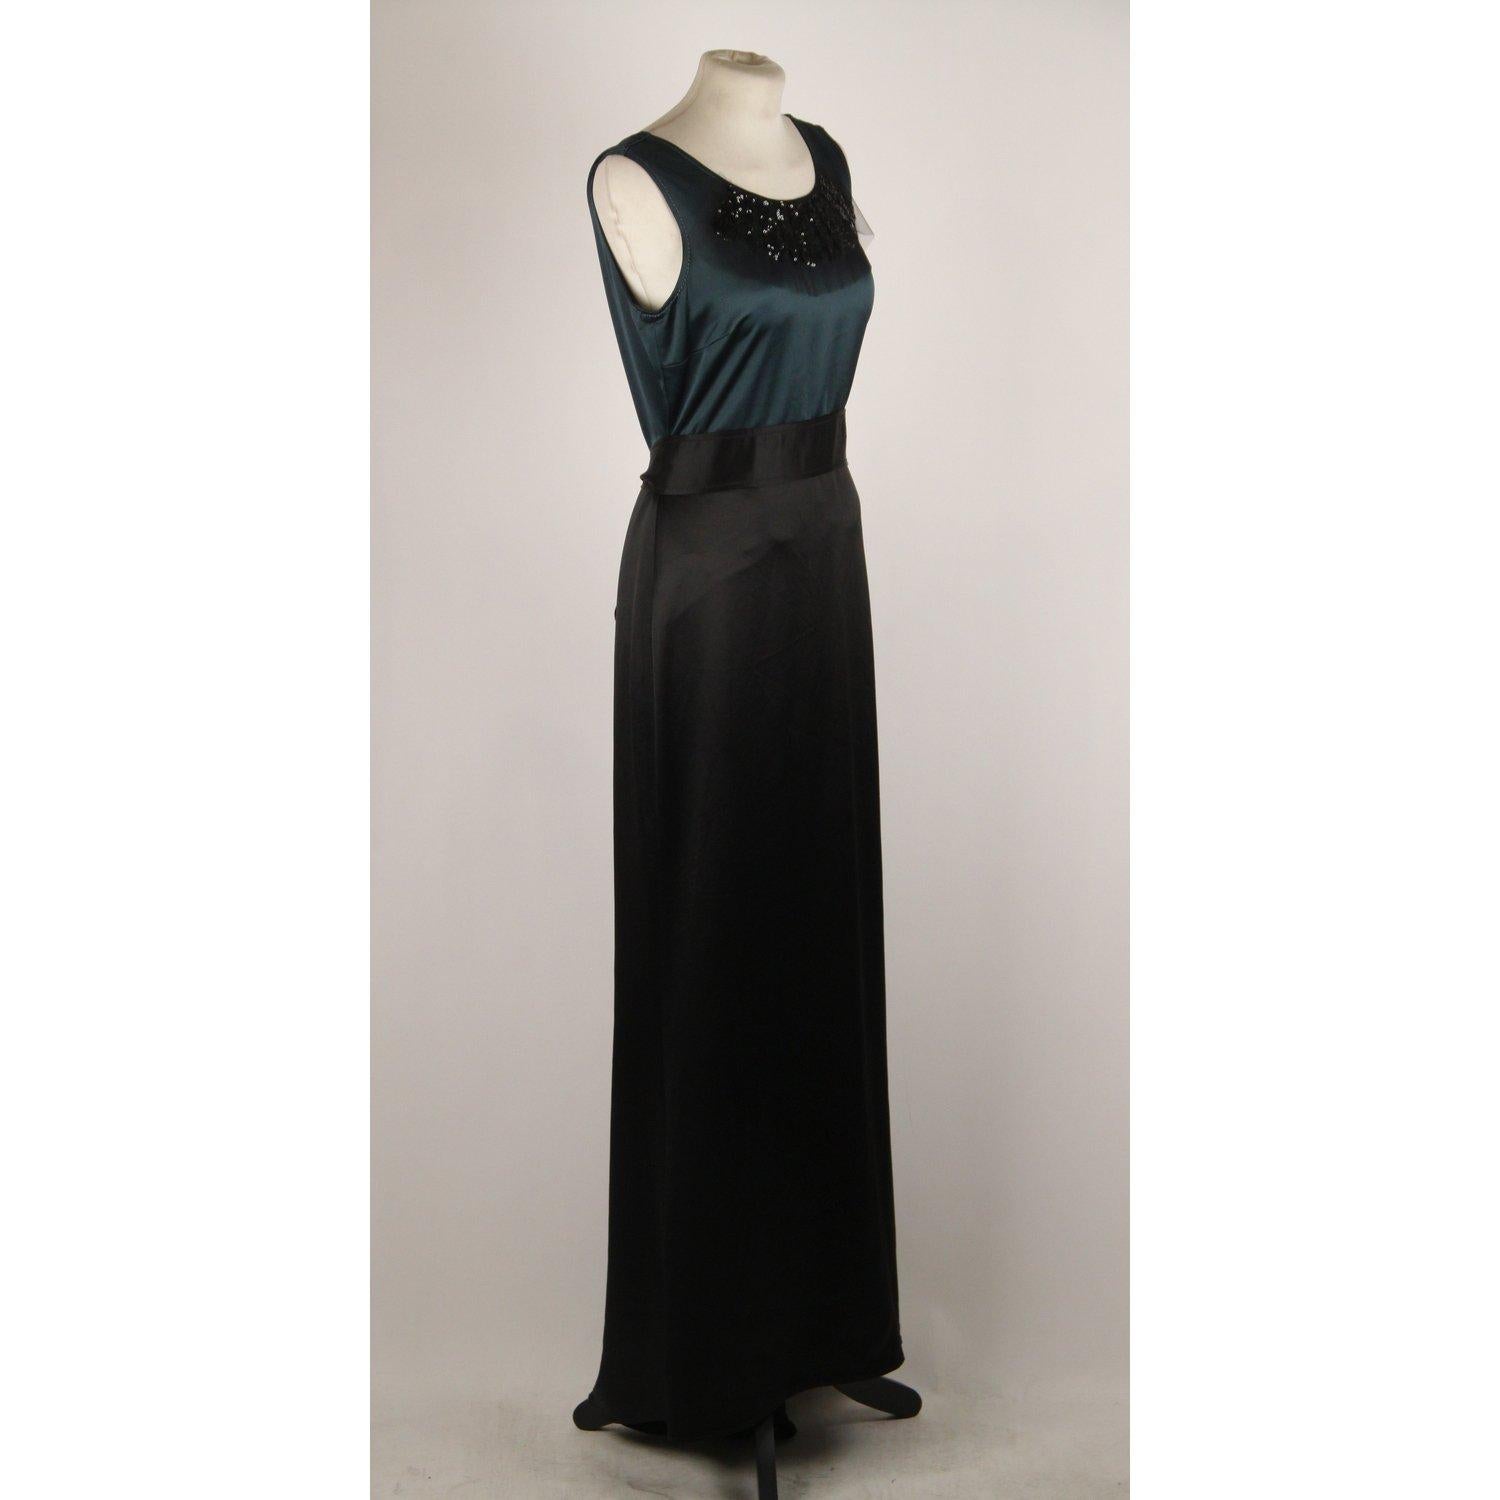 MATERIAL: Satin COLOR: Green, Black MODEL: Evening Dress GENDER: Women SIZE: Small COUNTRY OF MANUFACTURE: China Condition CONDITION DETAILS: B :GOOD CONDITION - Some light wear of use - Some wear of use on fabric on the hem due to normal use